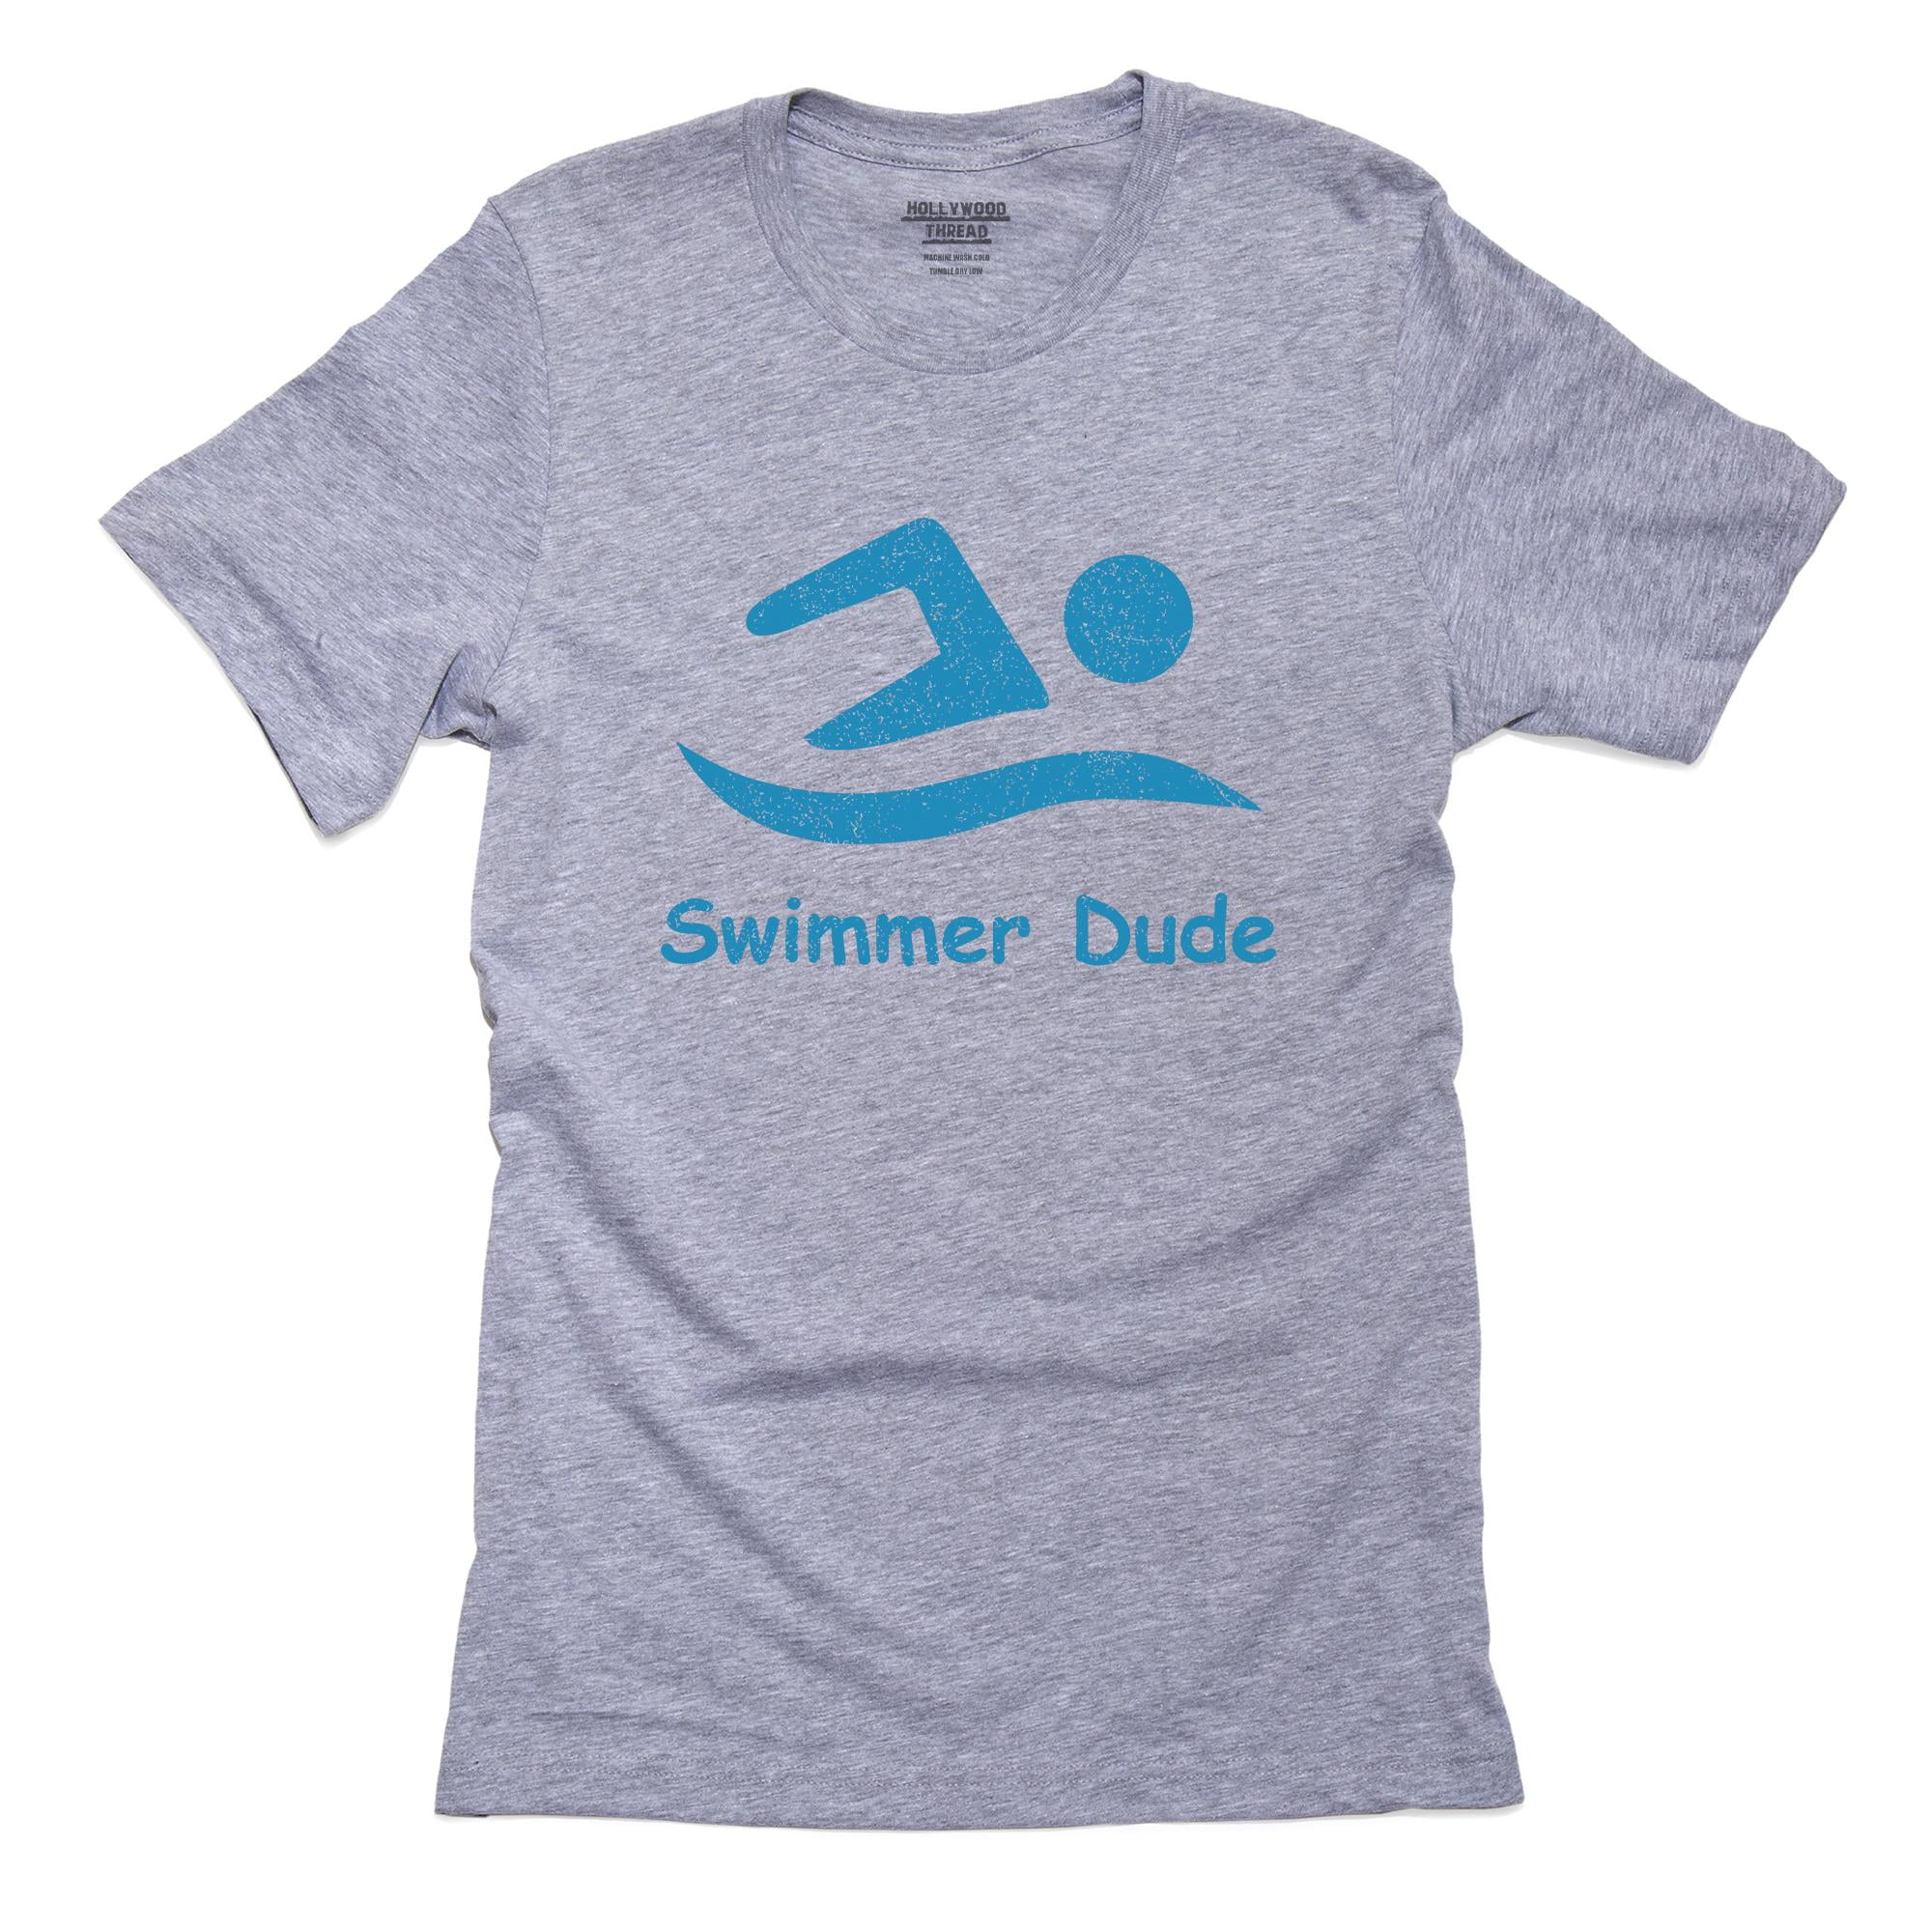 Swimmer Dude - Clever Stick Figure Swimming Men's Grey T-Shirt ...